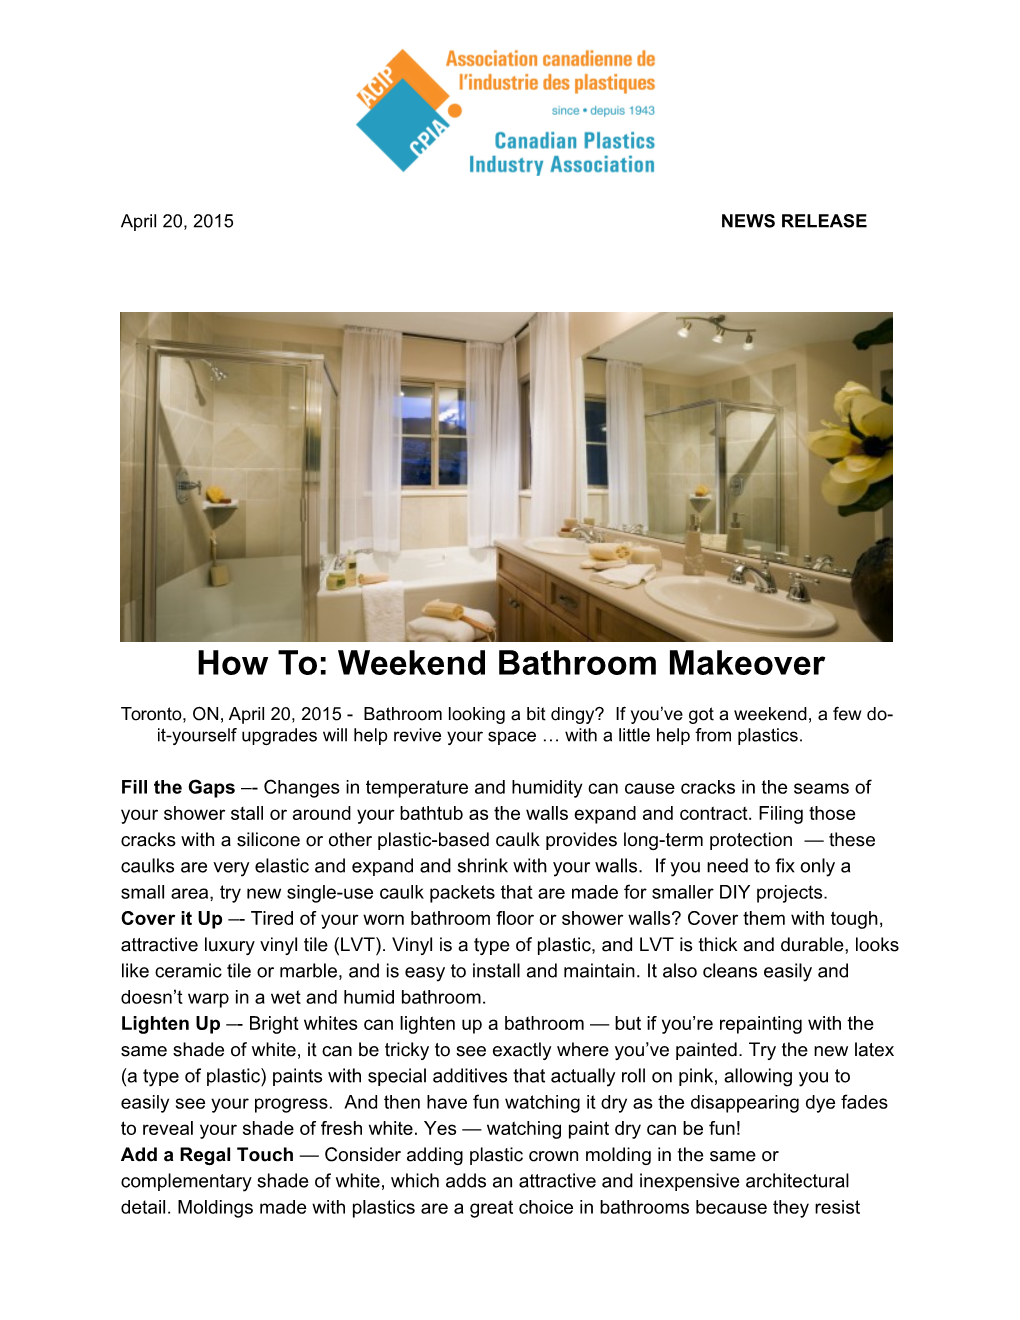 How To: Weekend Bathroom Makeover